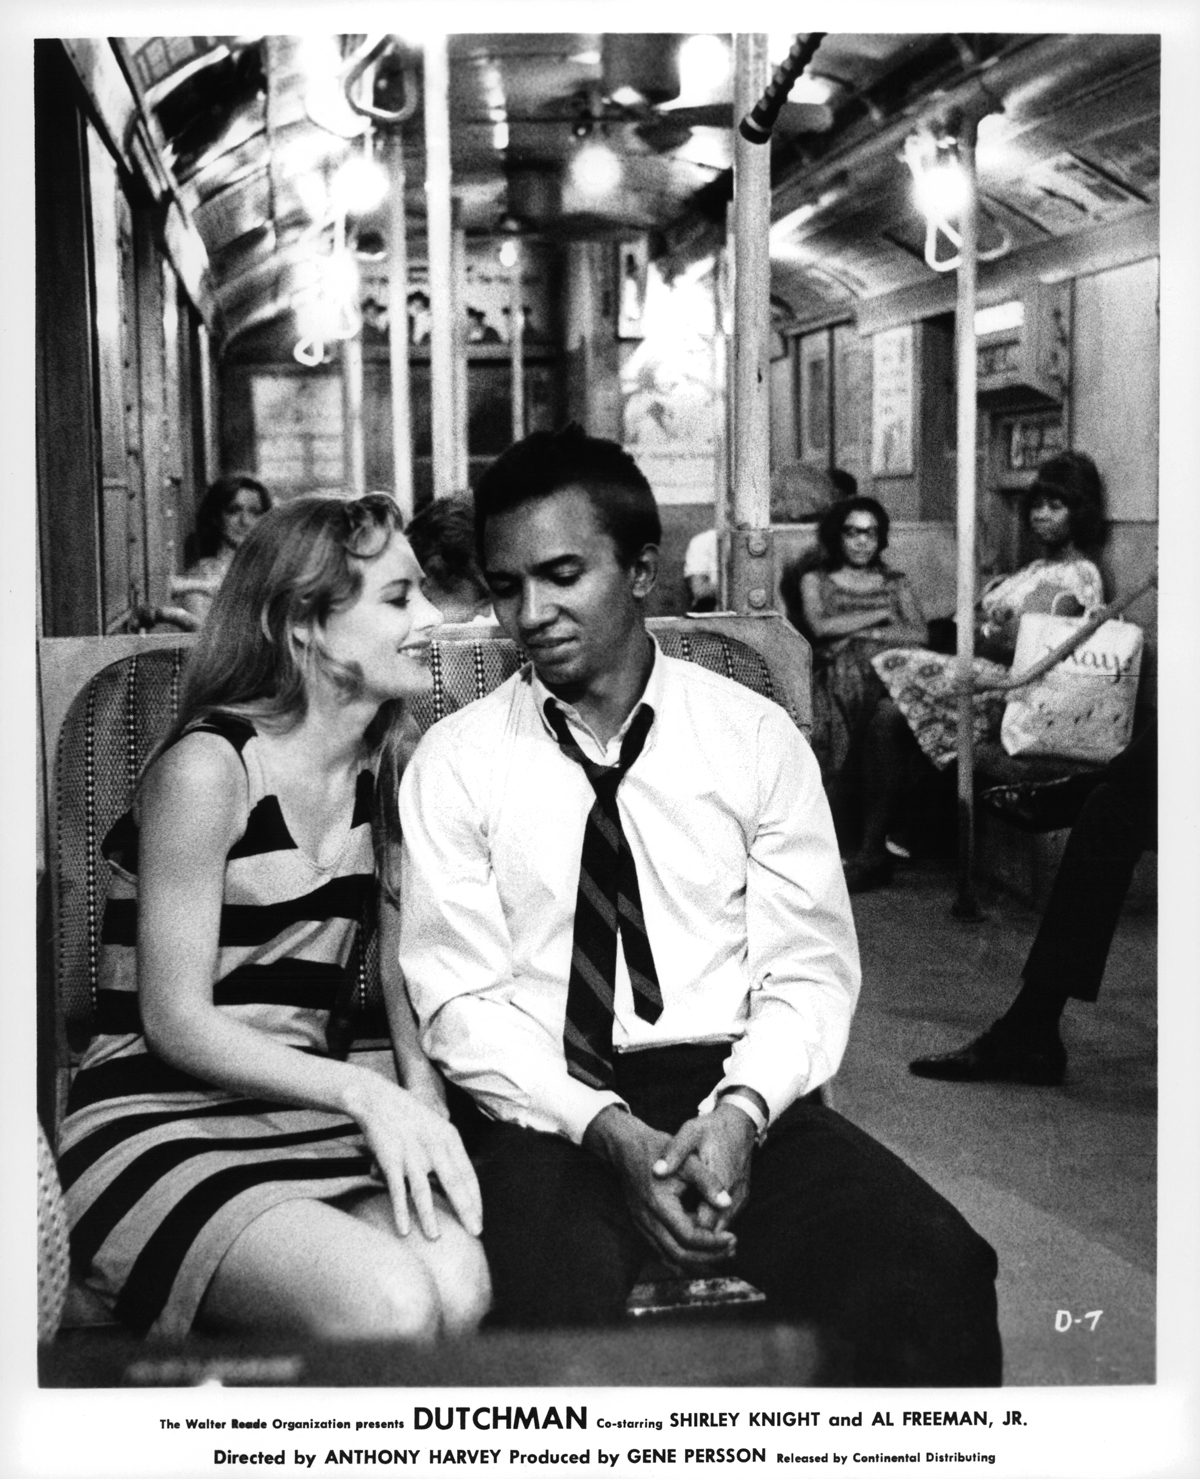 Black-and-white image of a white woman talking to a Black man in a subway car, people in background